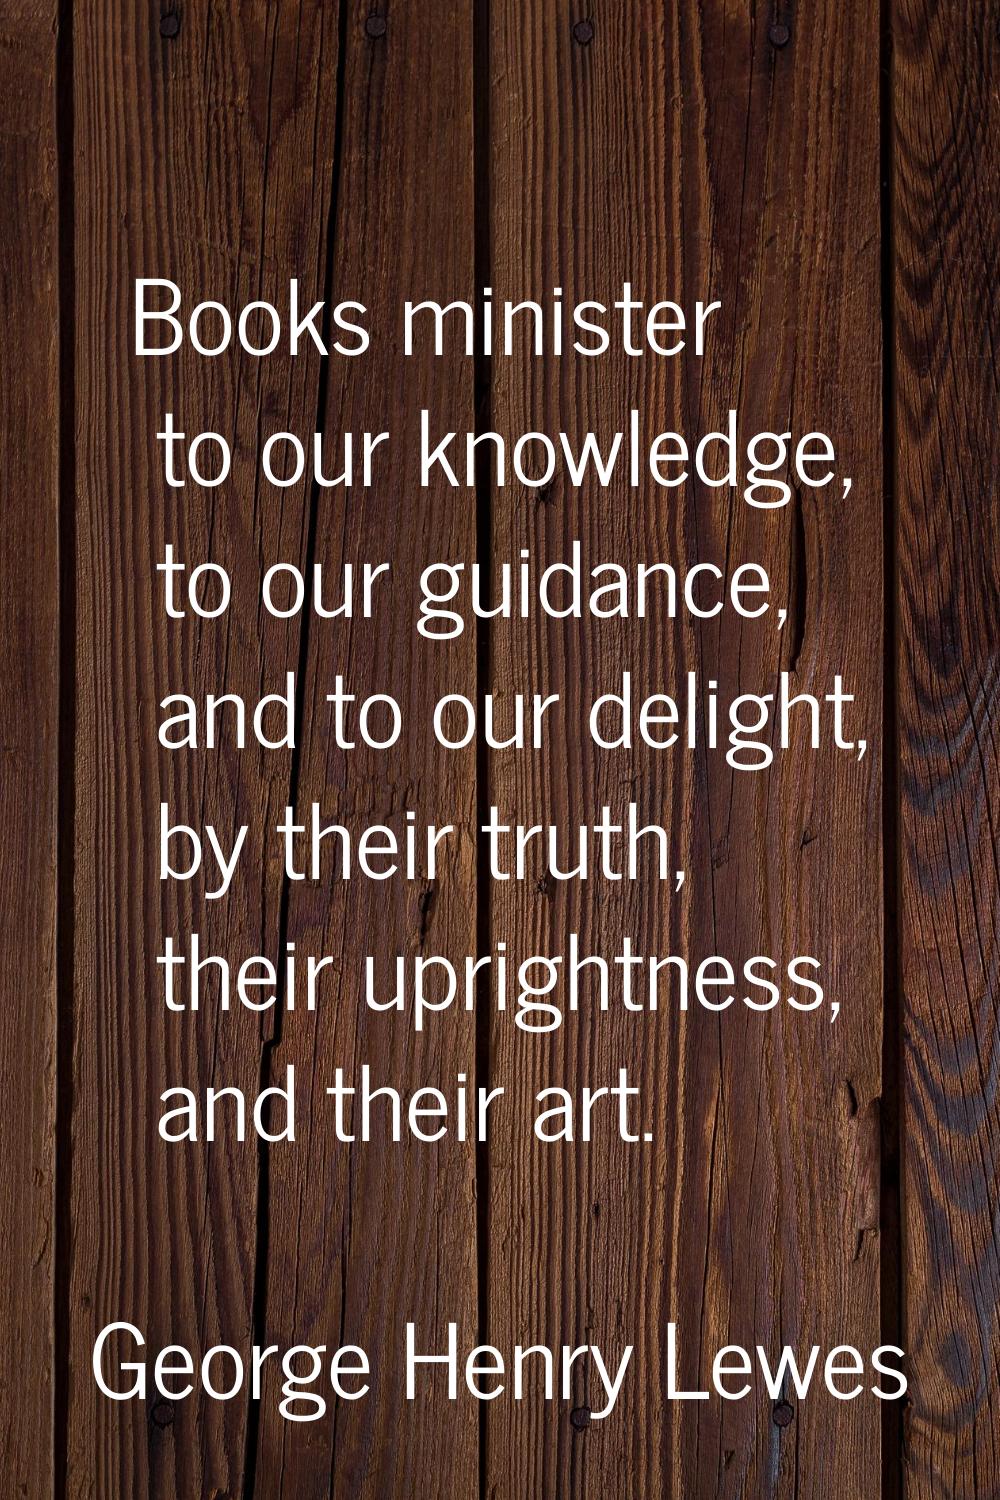 Books minister to our knowledge, to our guidance, and to our delight, by their truth, their upright